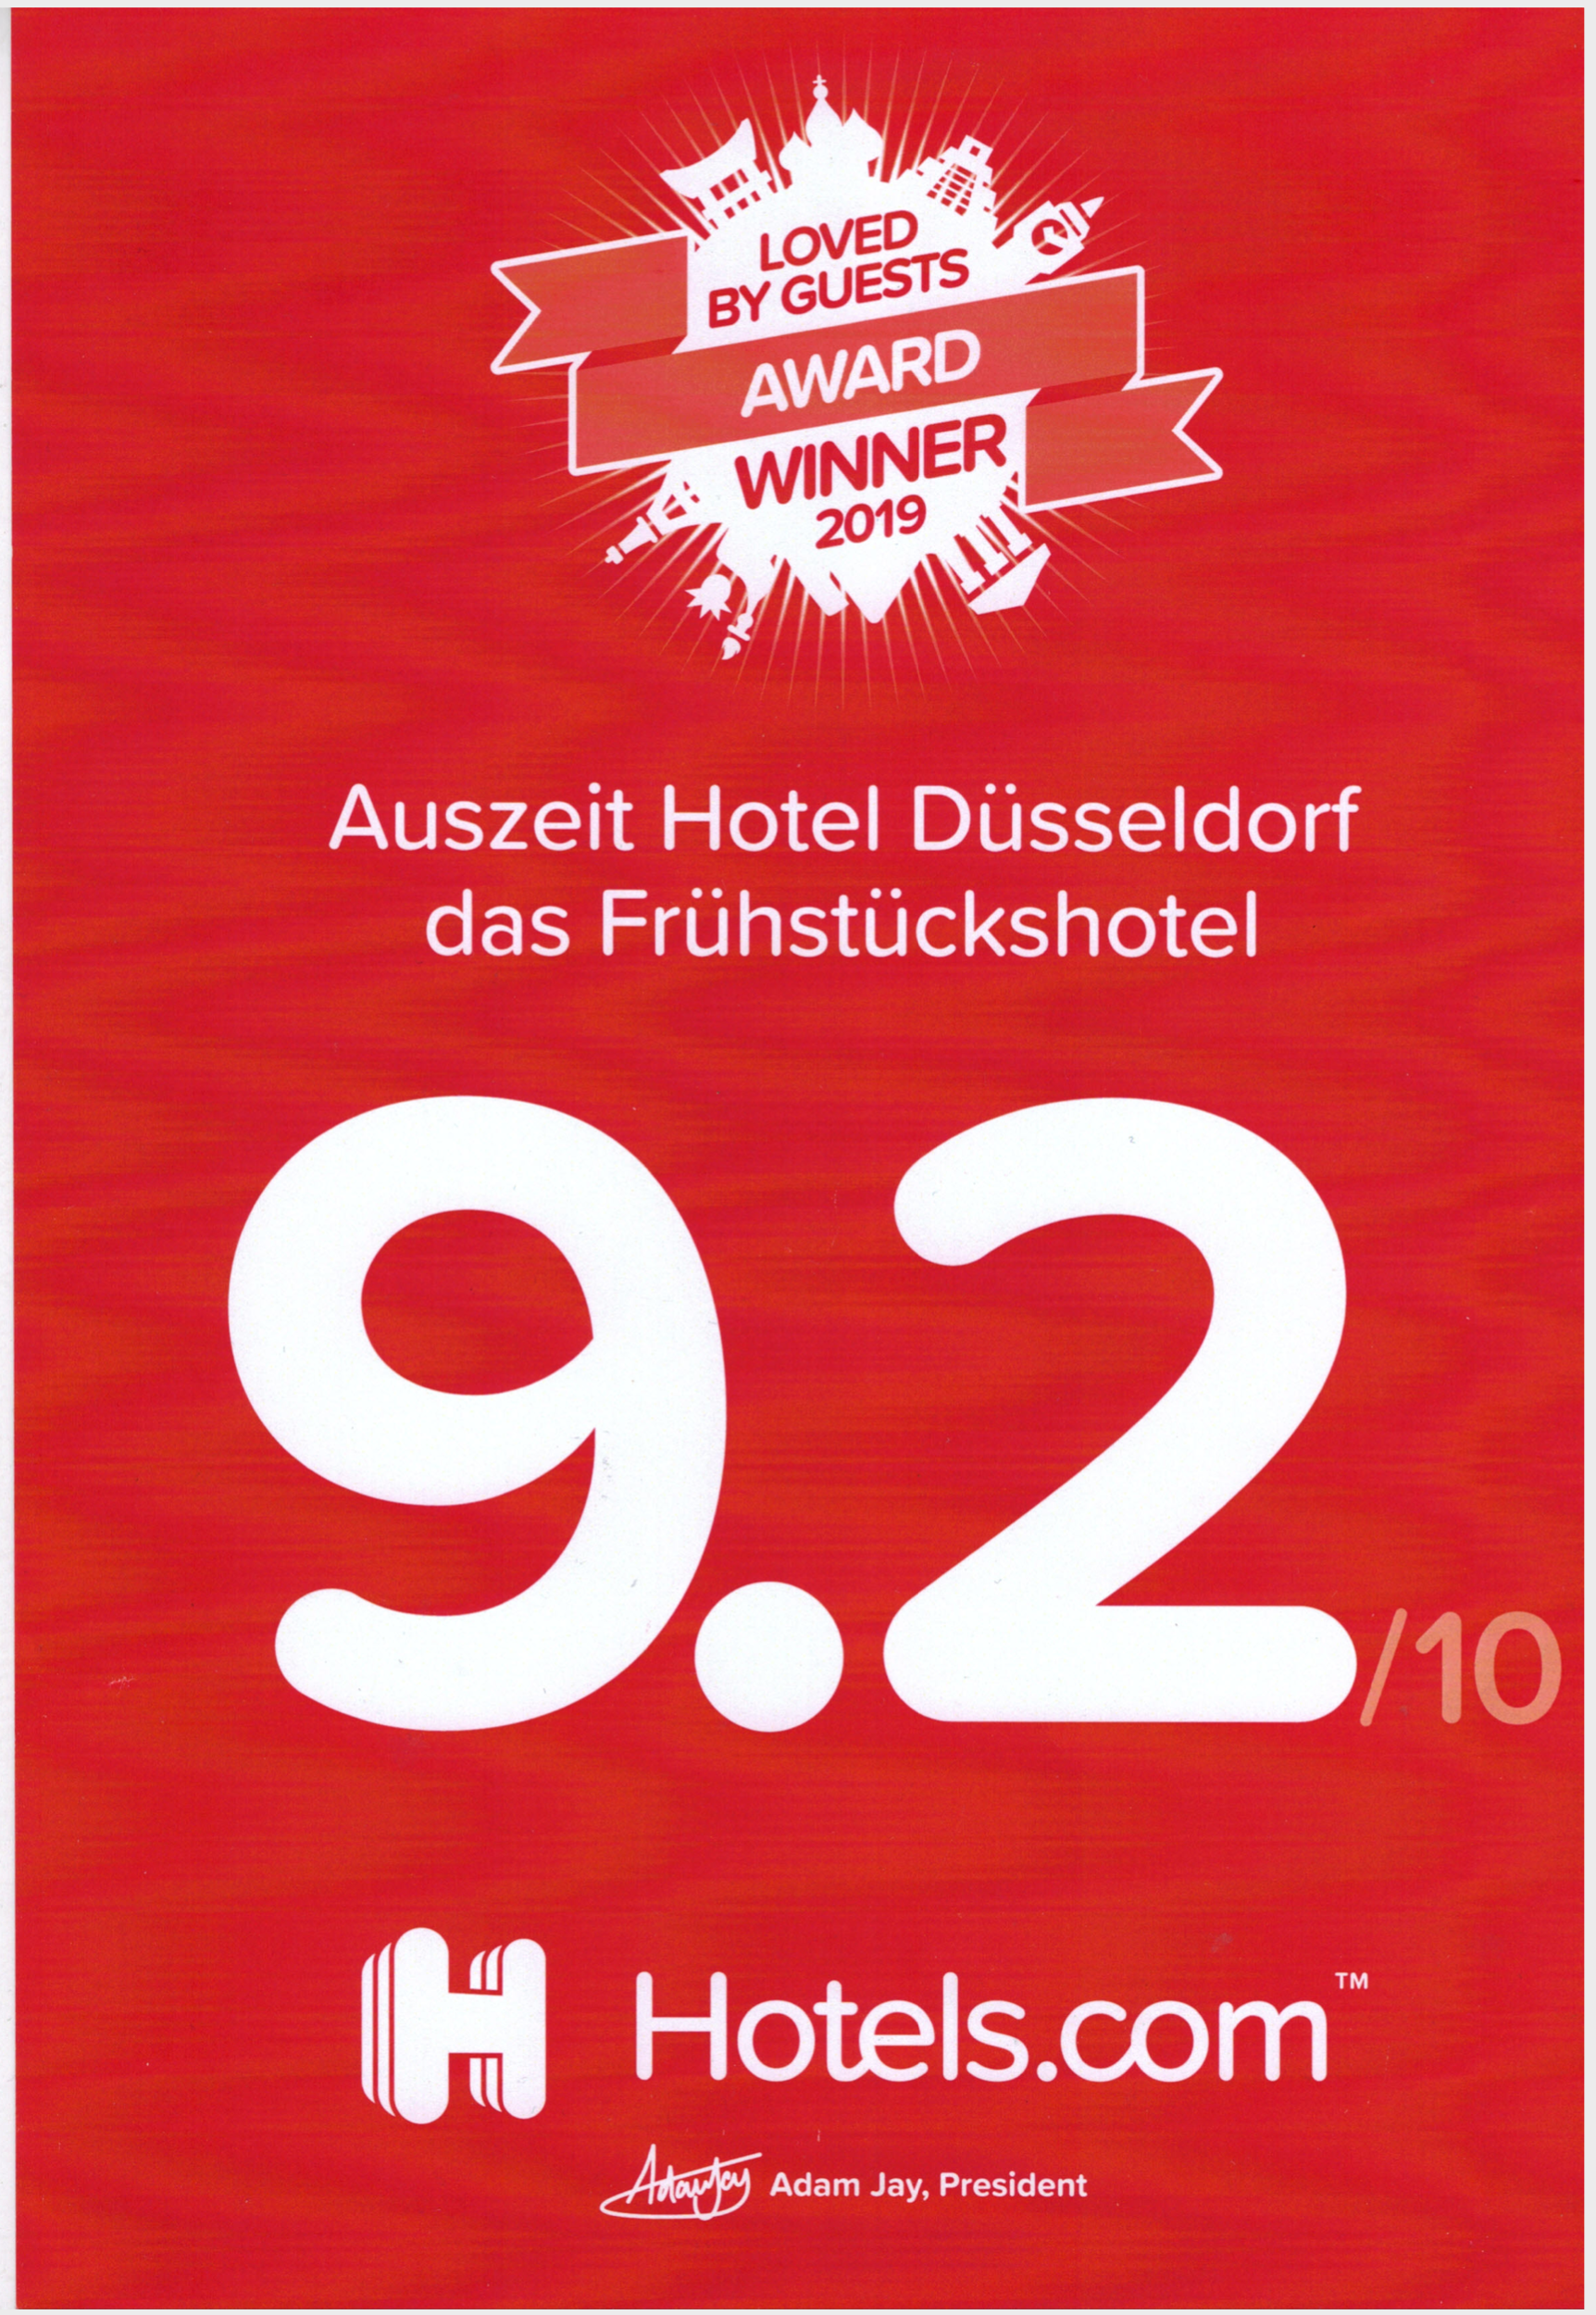 Hotels.com Loved by Guests Award 2019